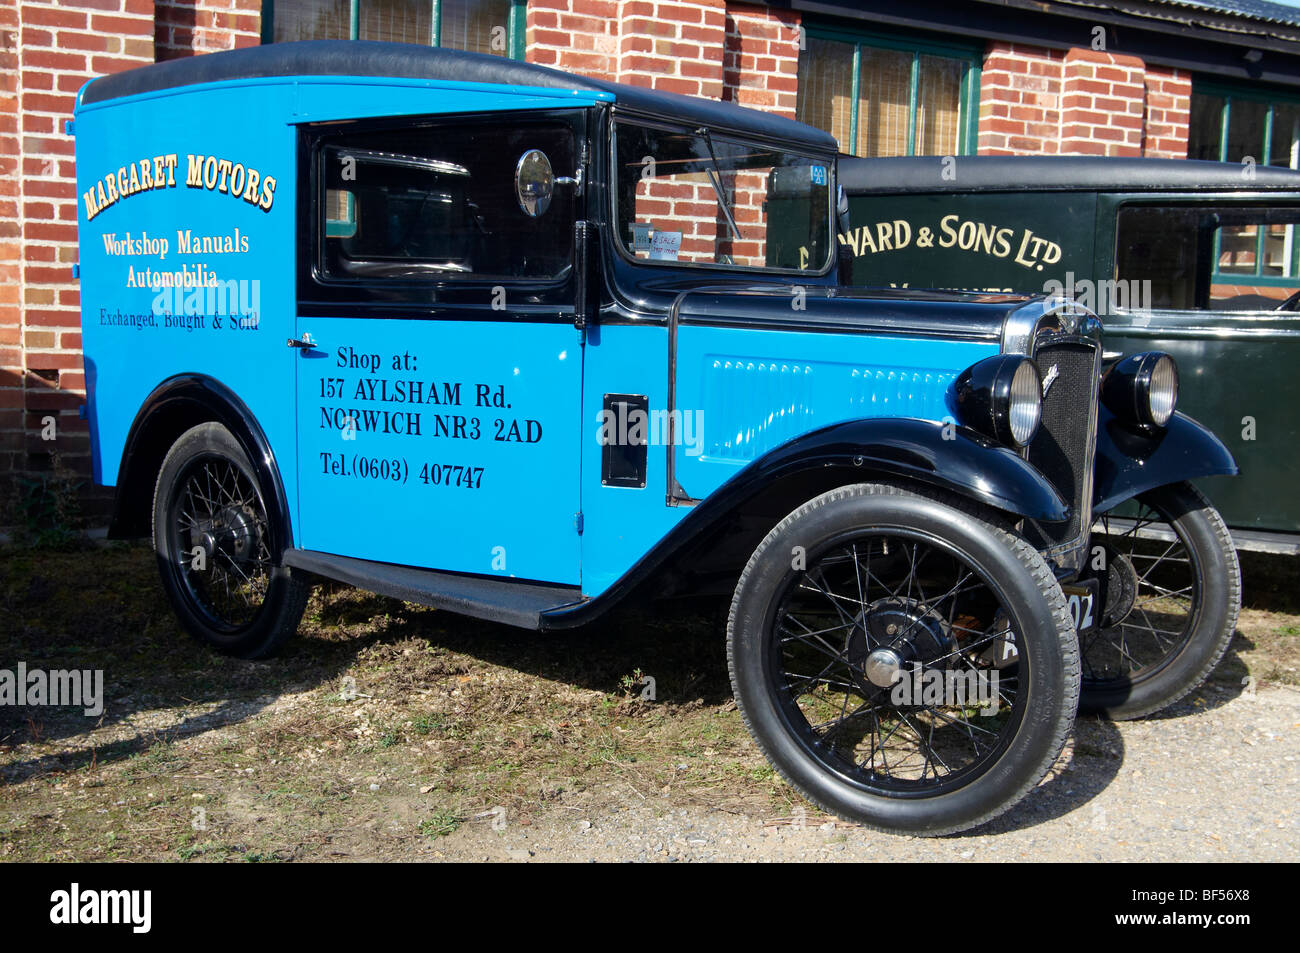 Vintage Austin 7 van from the 1930's in immaculate concours d'elegance  condition Stock Photo - Alamy